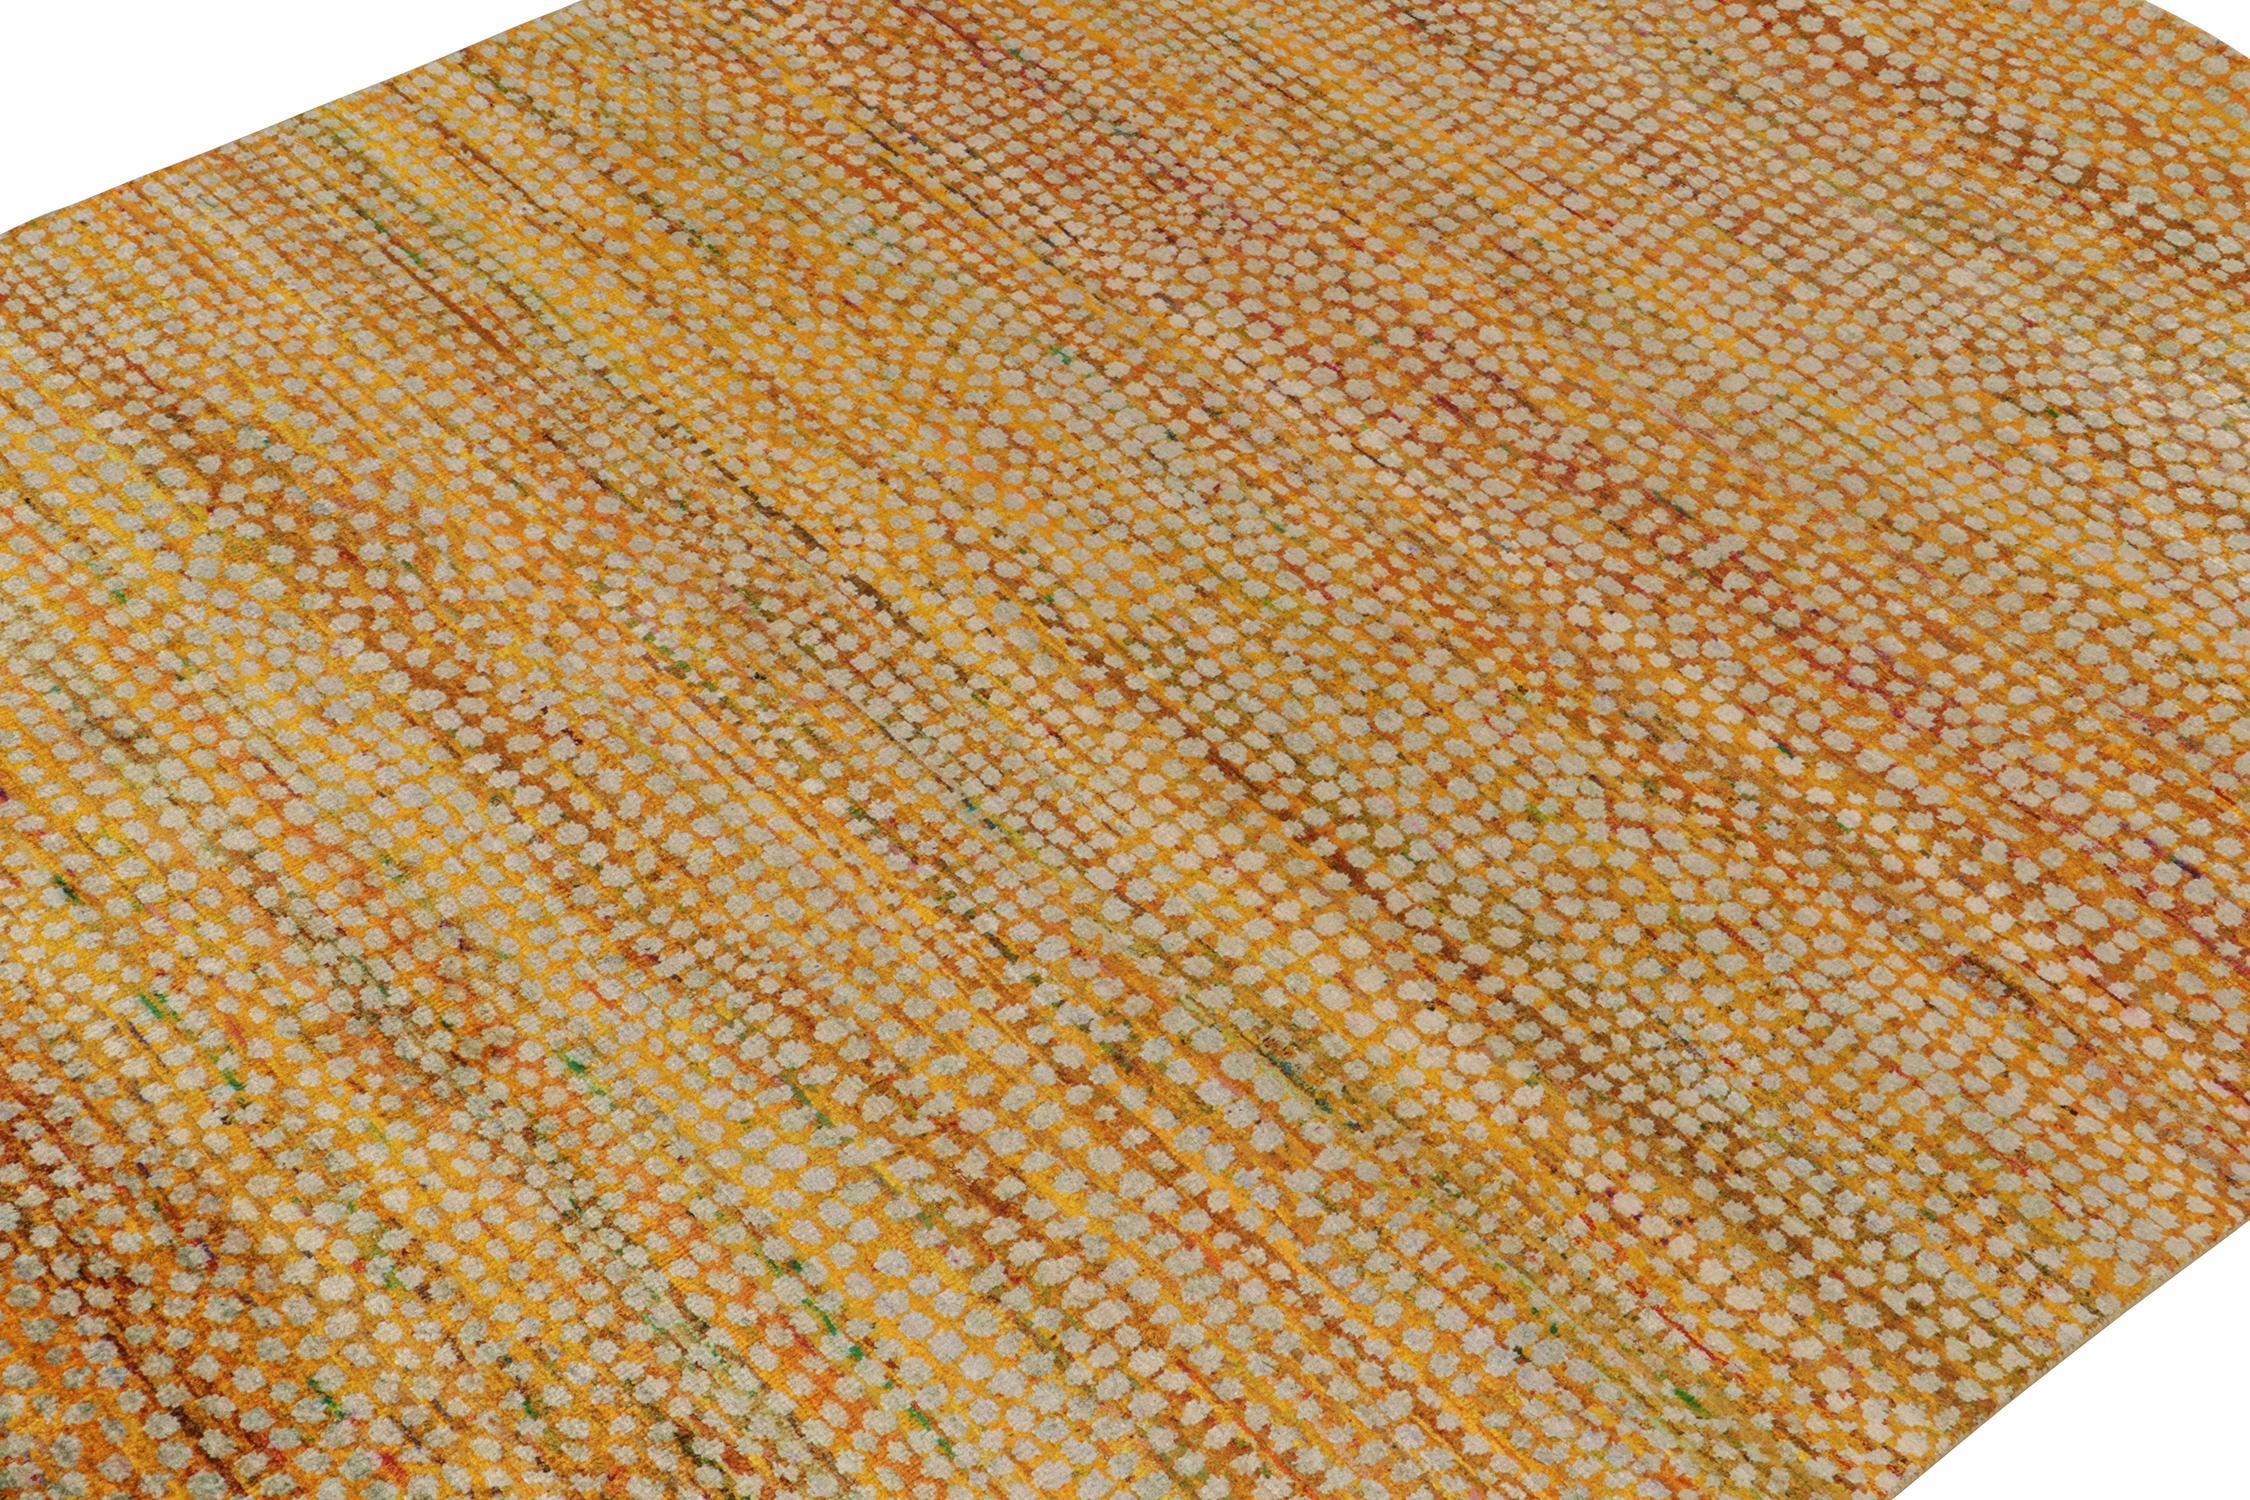 Indian Rug & Kilim’s Contemporary Rug in Golden-Yellow with White Dots Pattern